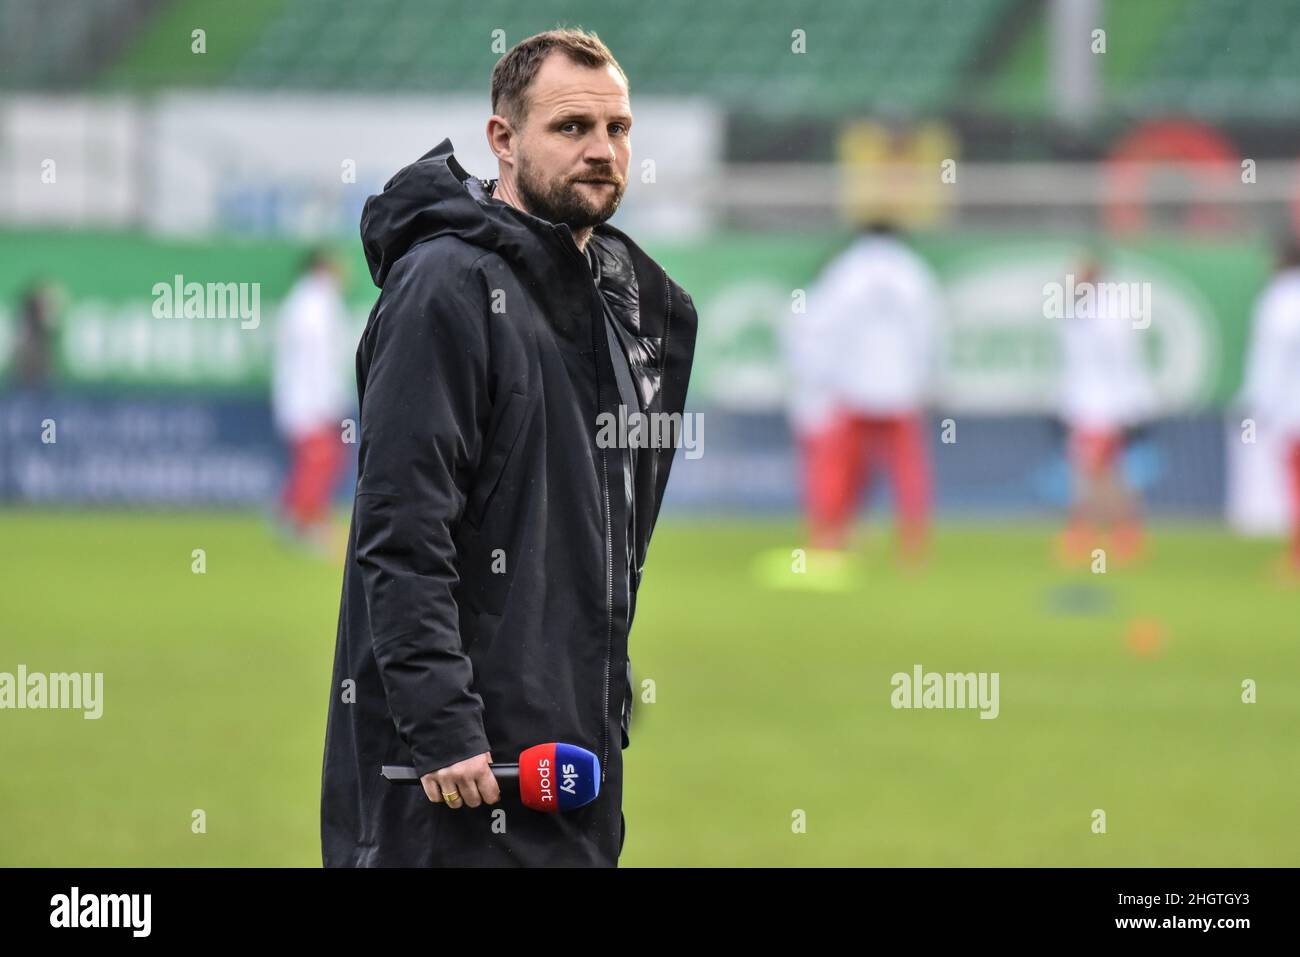 Germany ,Fuerth, Sportpark Ronhof Thomas Sommer - 22 Jan 2022 - Fussball, 1.Bundesliga - SpVgg Greuther Fuerth vs. FSV Mainz 05  Image: Trainer Bo Svensson (Mainz) during his SKY pregame interview.  DFL regulations prohibit any use of photographs as image sequences and or quasi-video Stock Photo